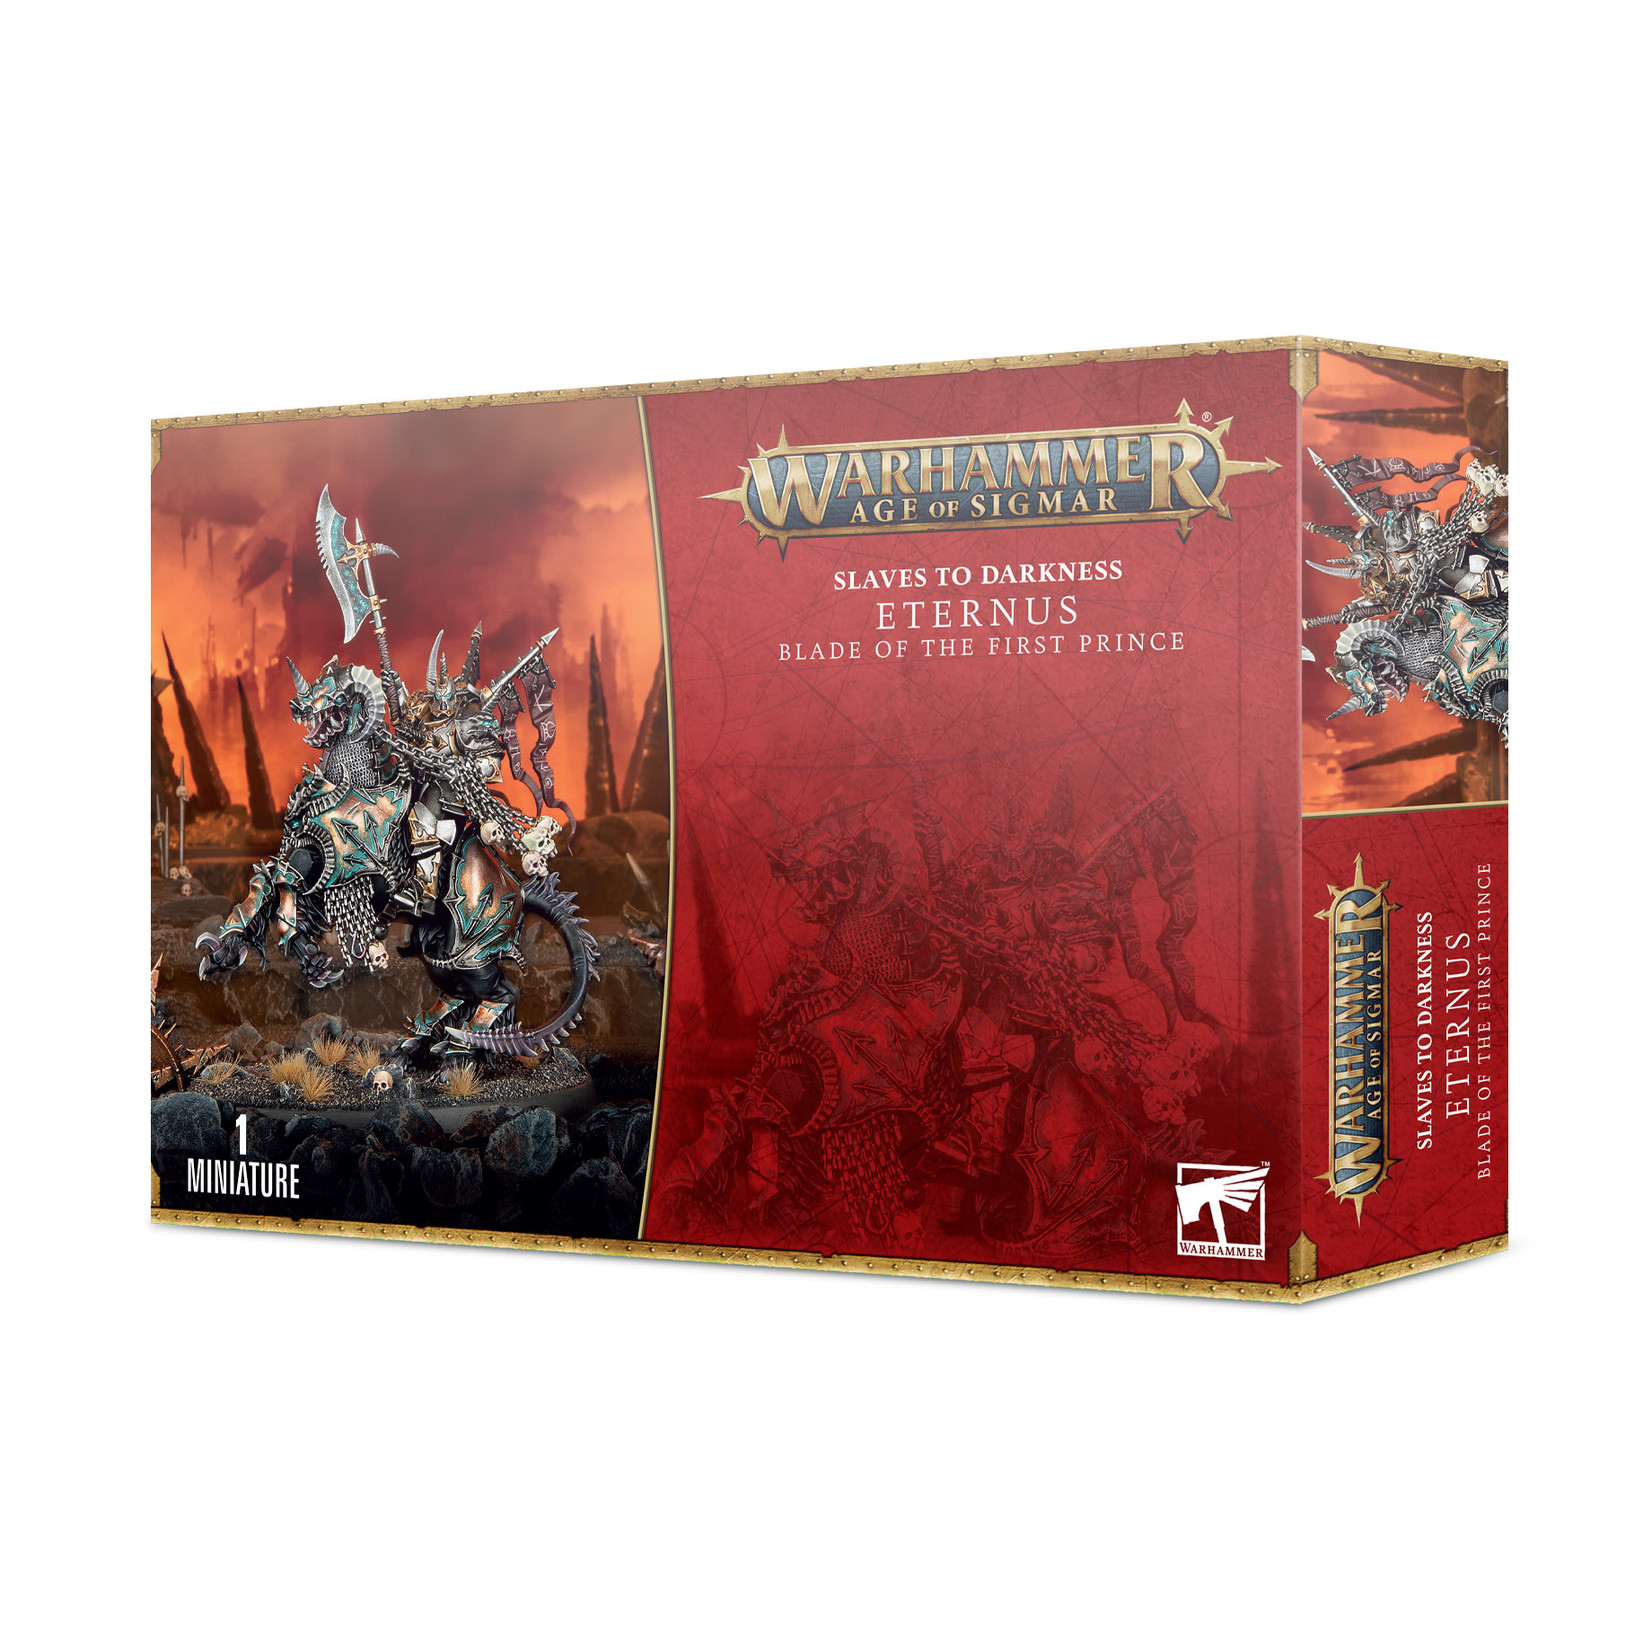 Games Workshop Warhammer Age of Sigmar Chaos Slaves to Darkness Eternus Blade of the First Prince